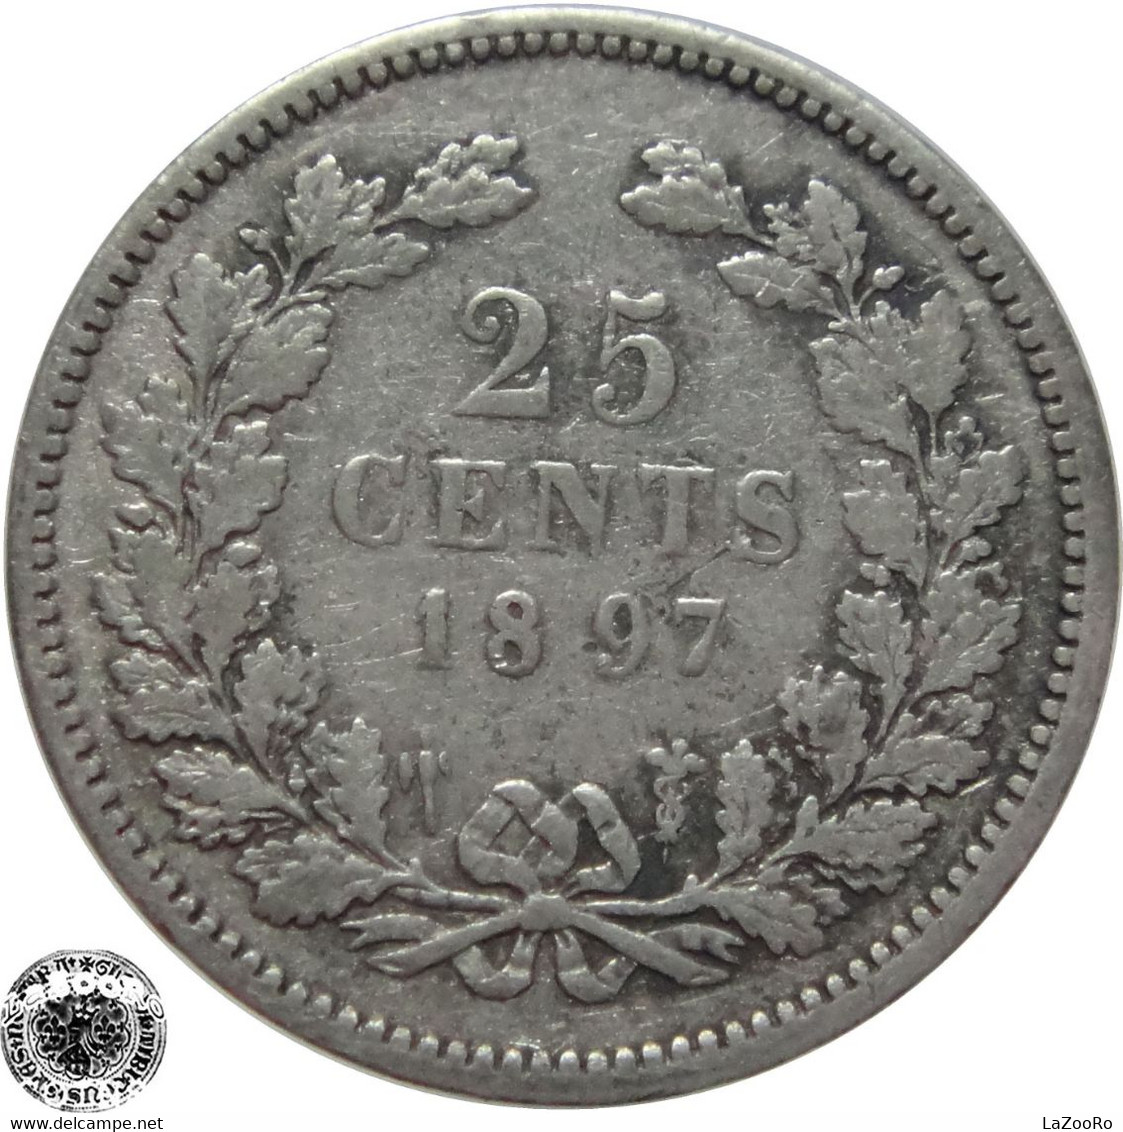 LaZooRo: Netherlands 25 Cents 1897 VF / XF - Silver - 25 Cent